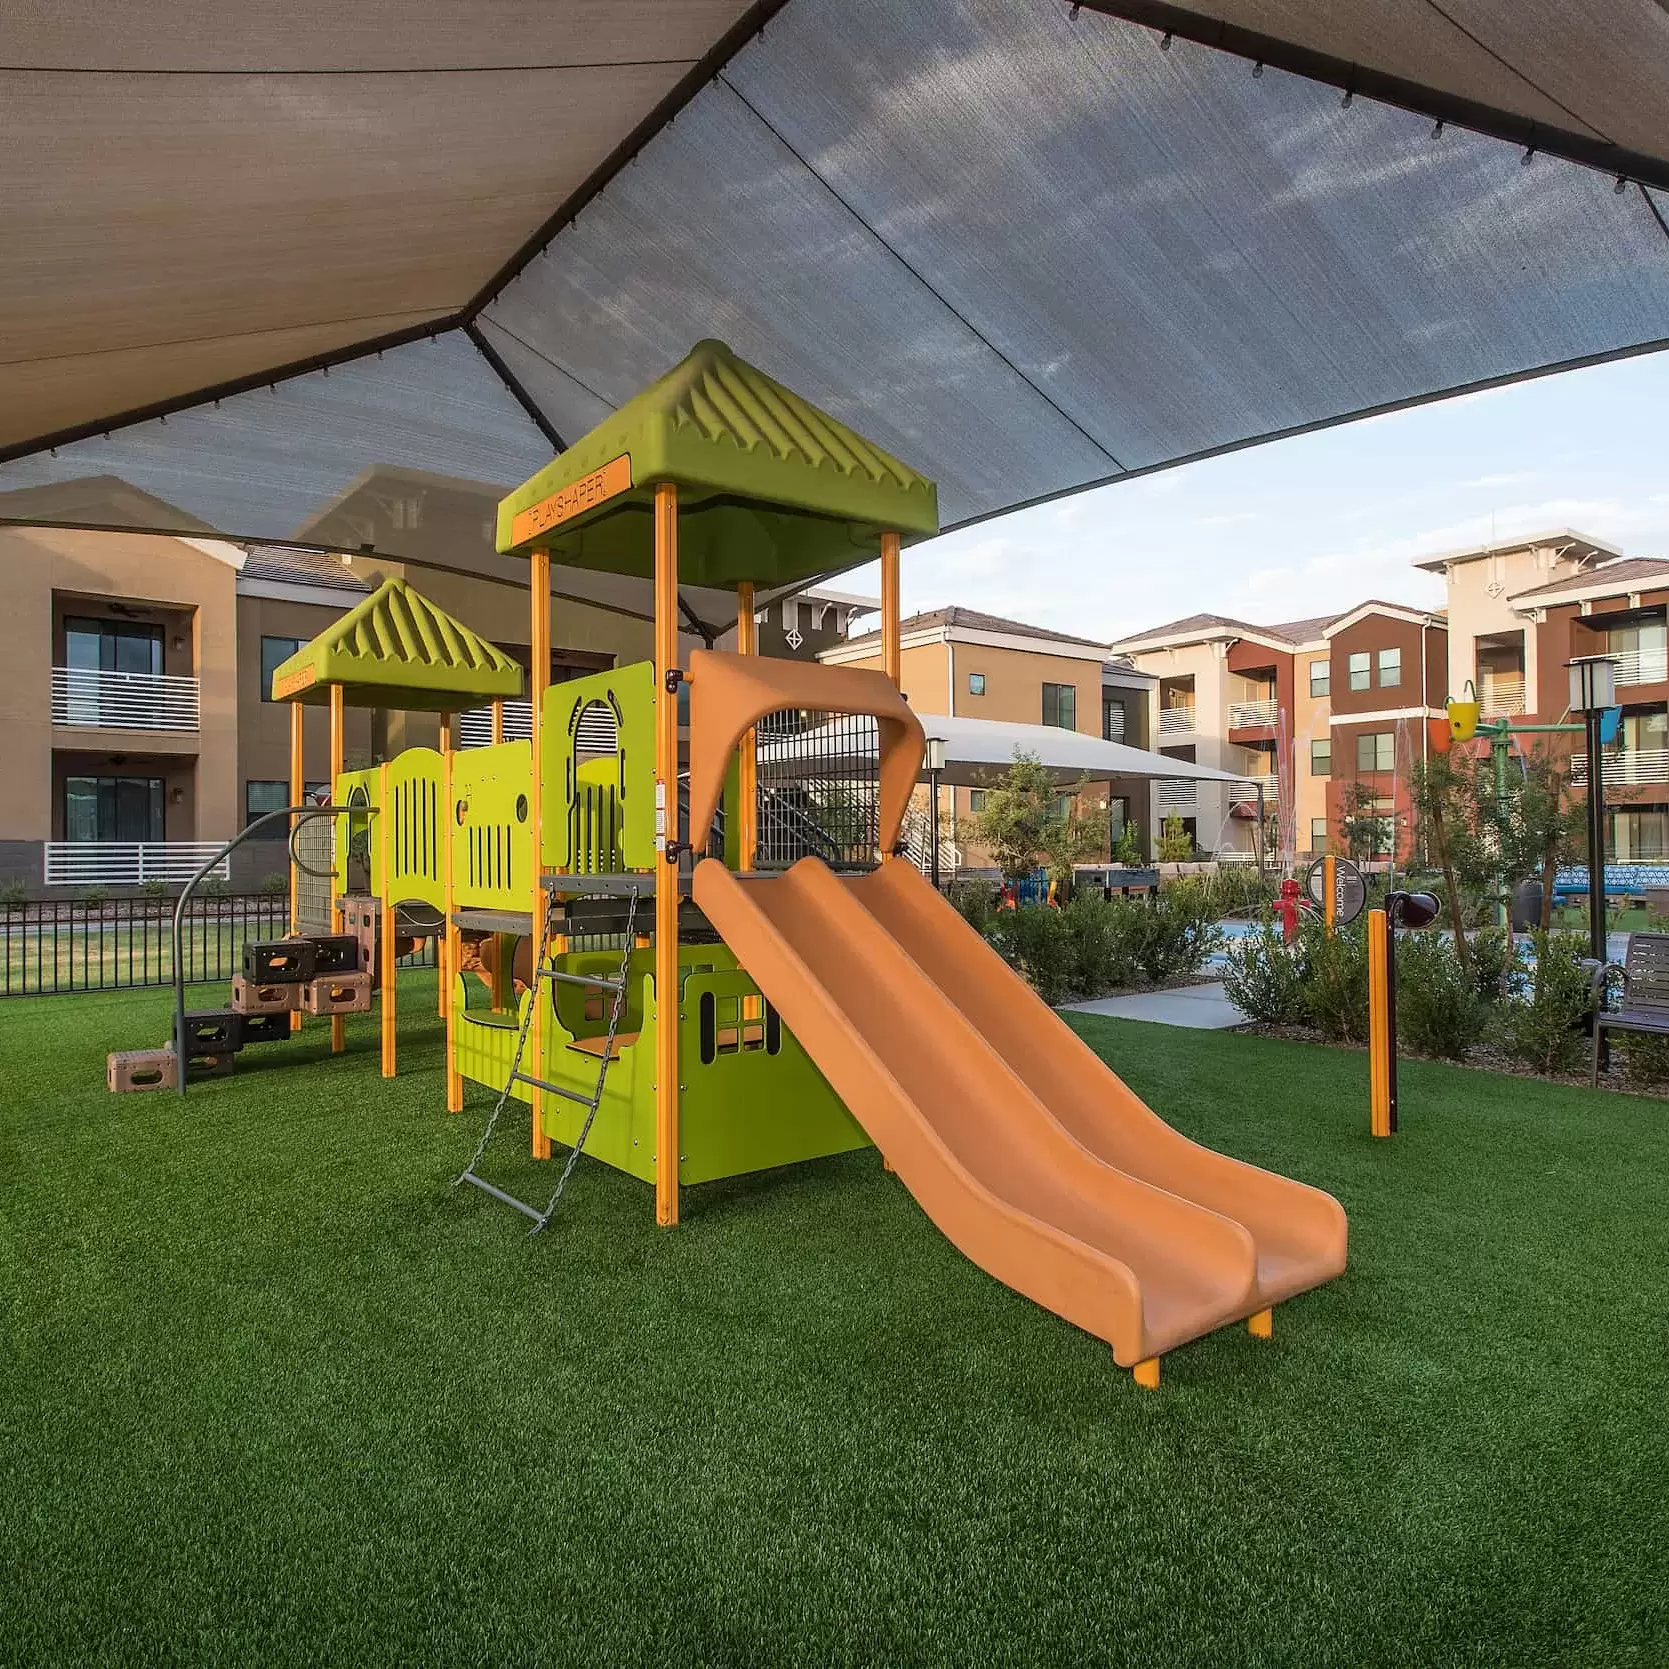 A shaded playground with slides for the children at Liv Northgate.